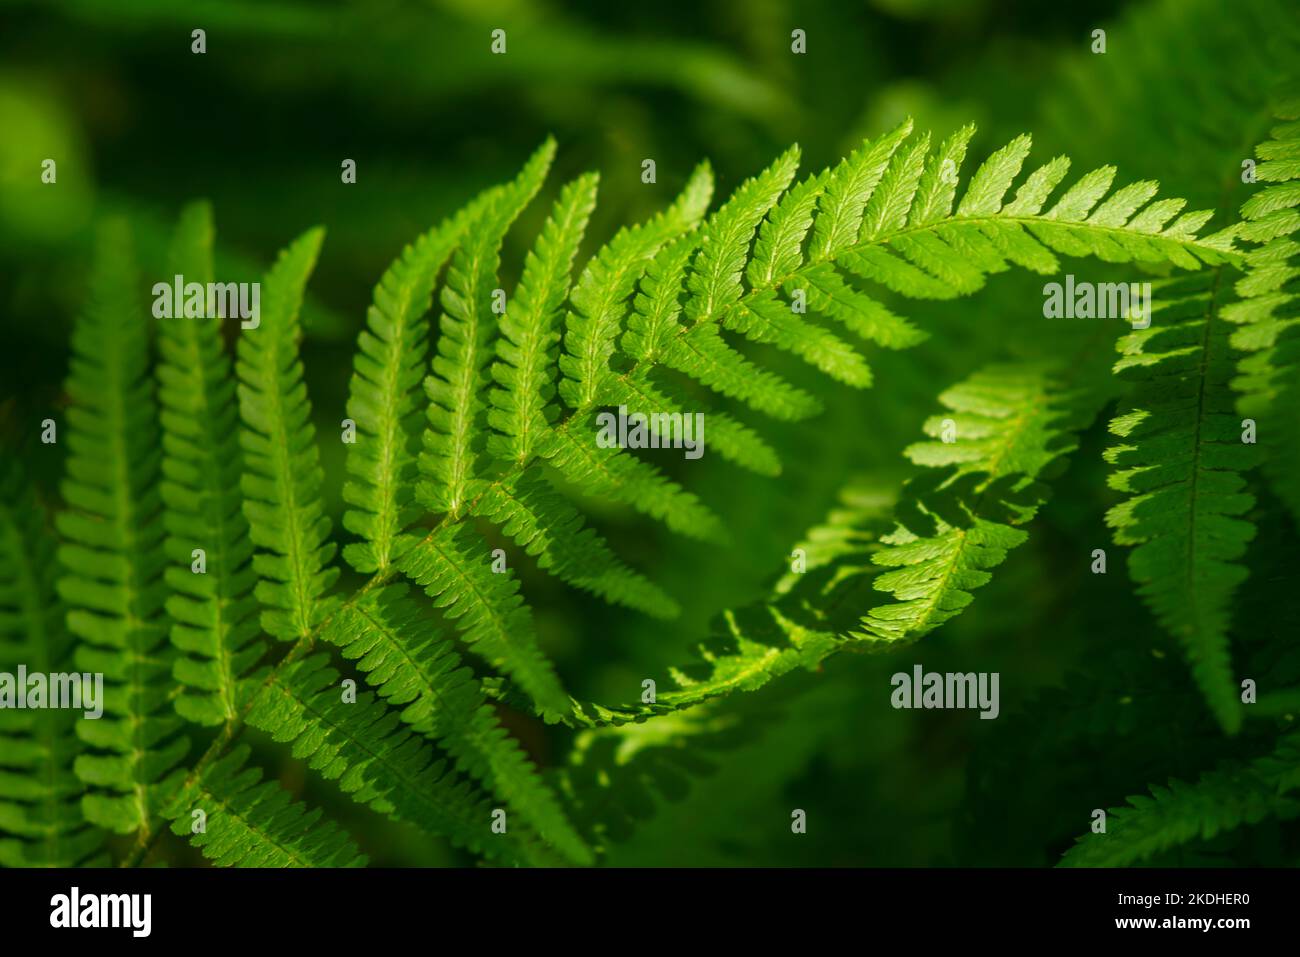 Beautiful close-up of a green fern frond, suitable as a natural green background texture Stock Photo